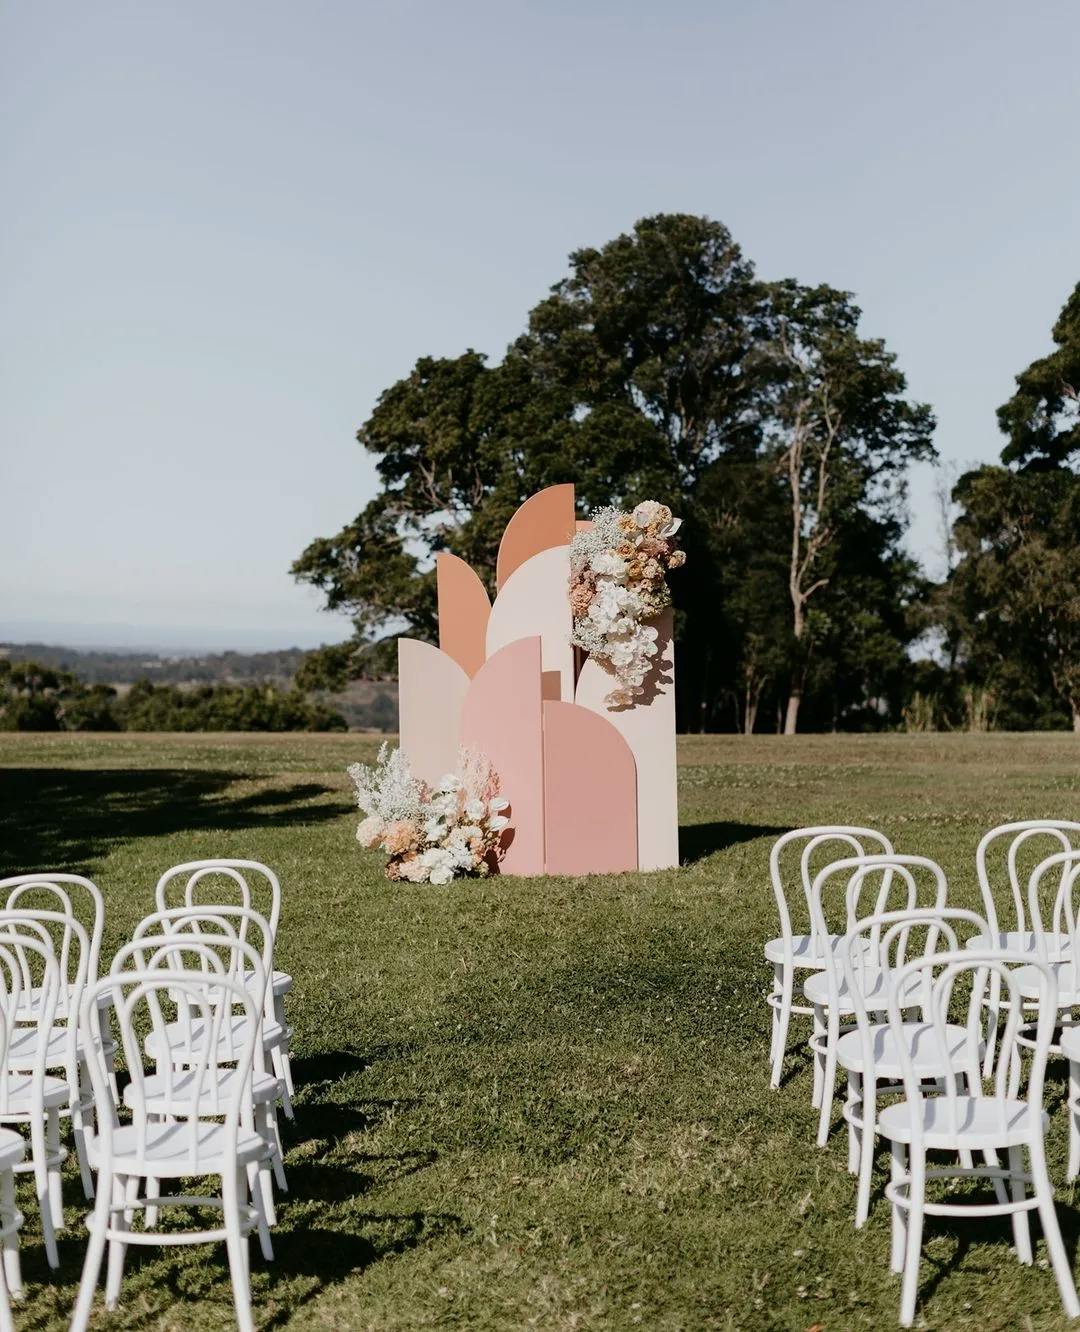 An outdoor wedding setup with white chairs arranged in rows on grass facing a pink and orange geometric backdrop adorned with floral arrangements. Tall trees and a distant landscape are visible in the background.